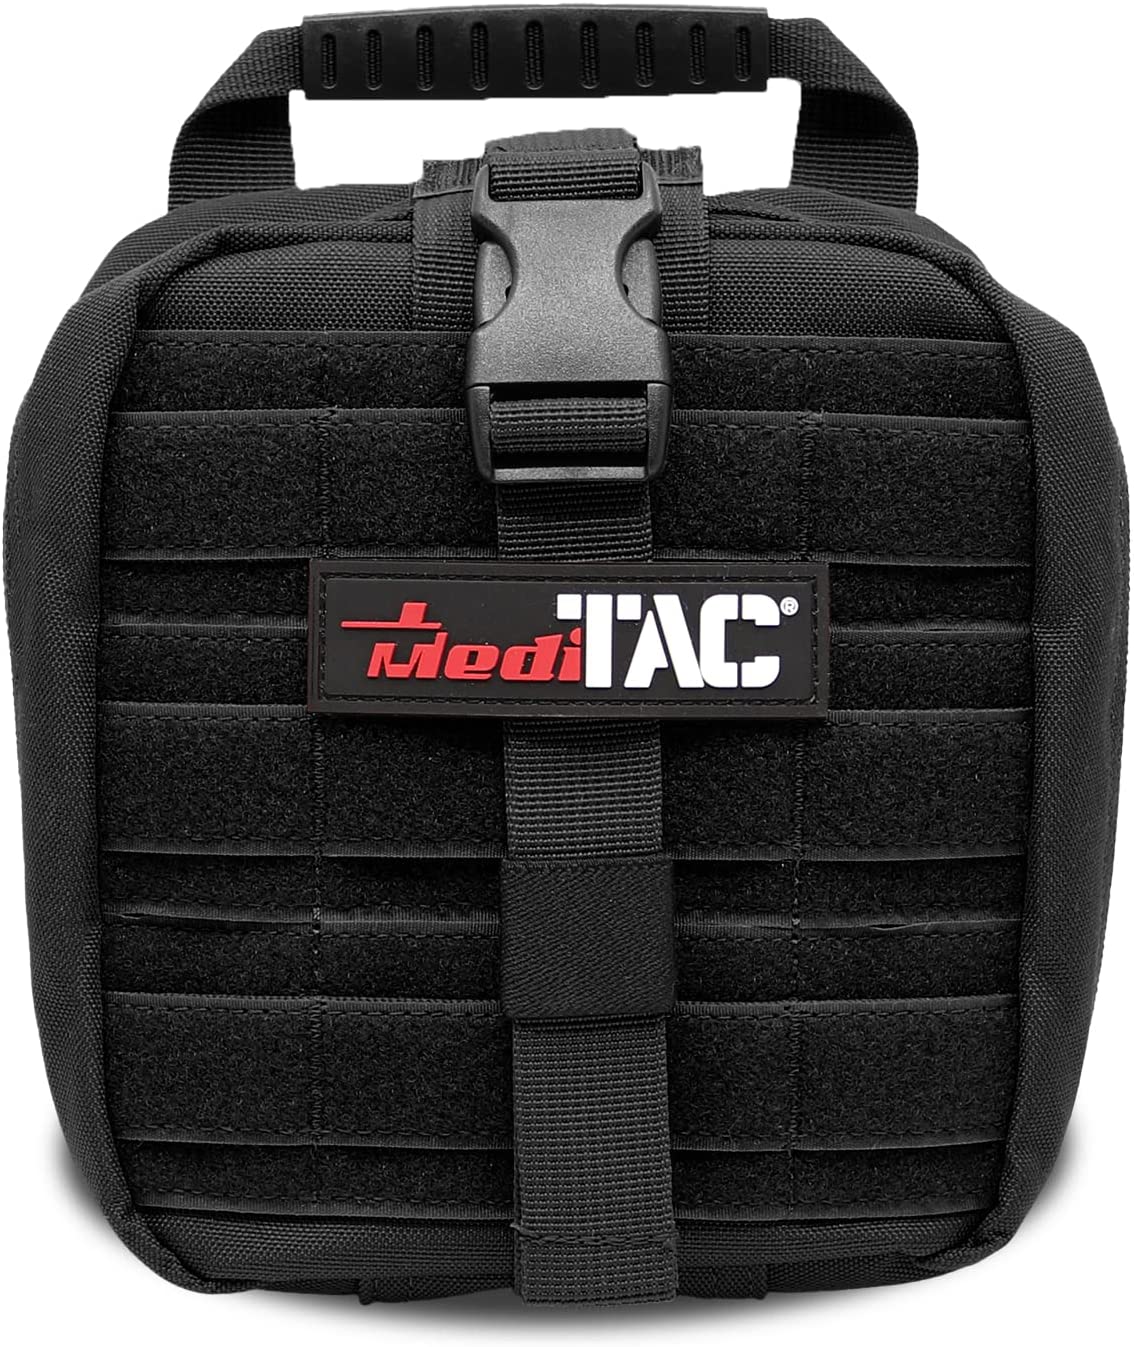 MediTac Small Owl Type Tactical Trauma Bag Feat. Rip-Away Velcro Fastener Bag Backpack, MOLLE Bag Rucksack Pack